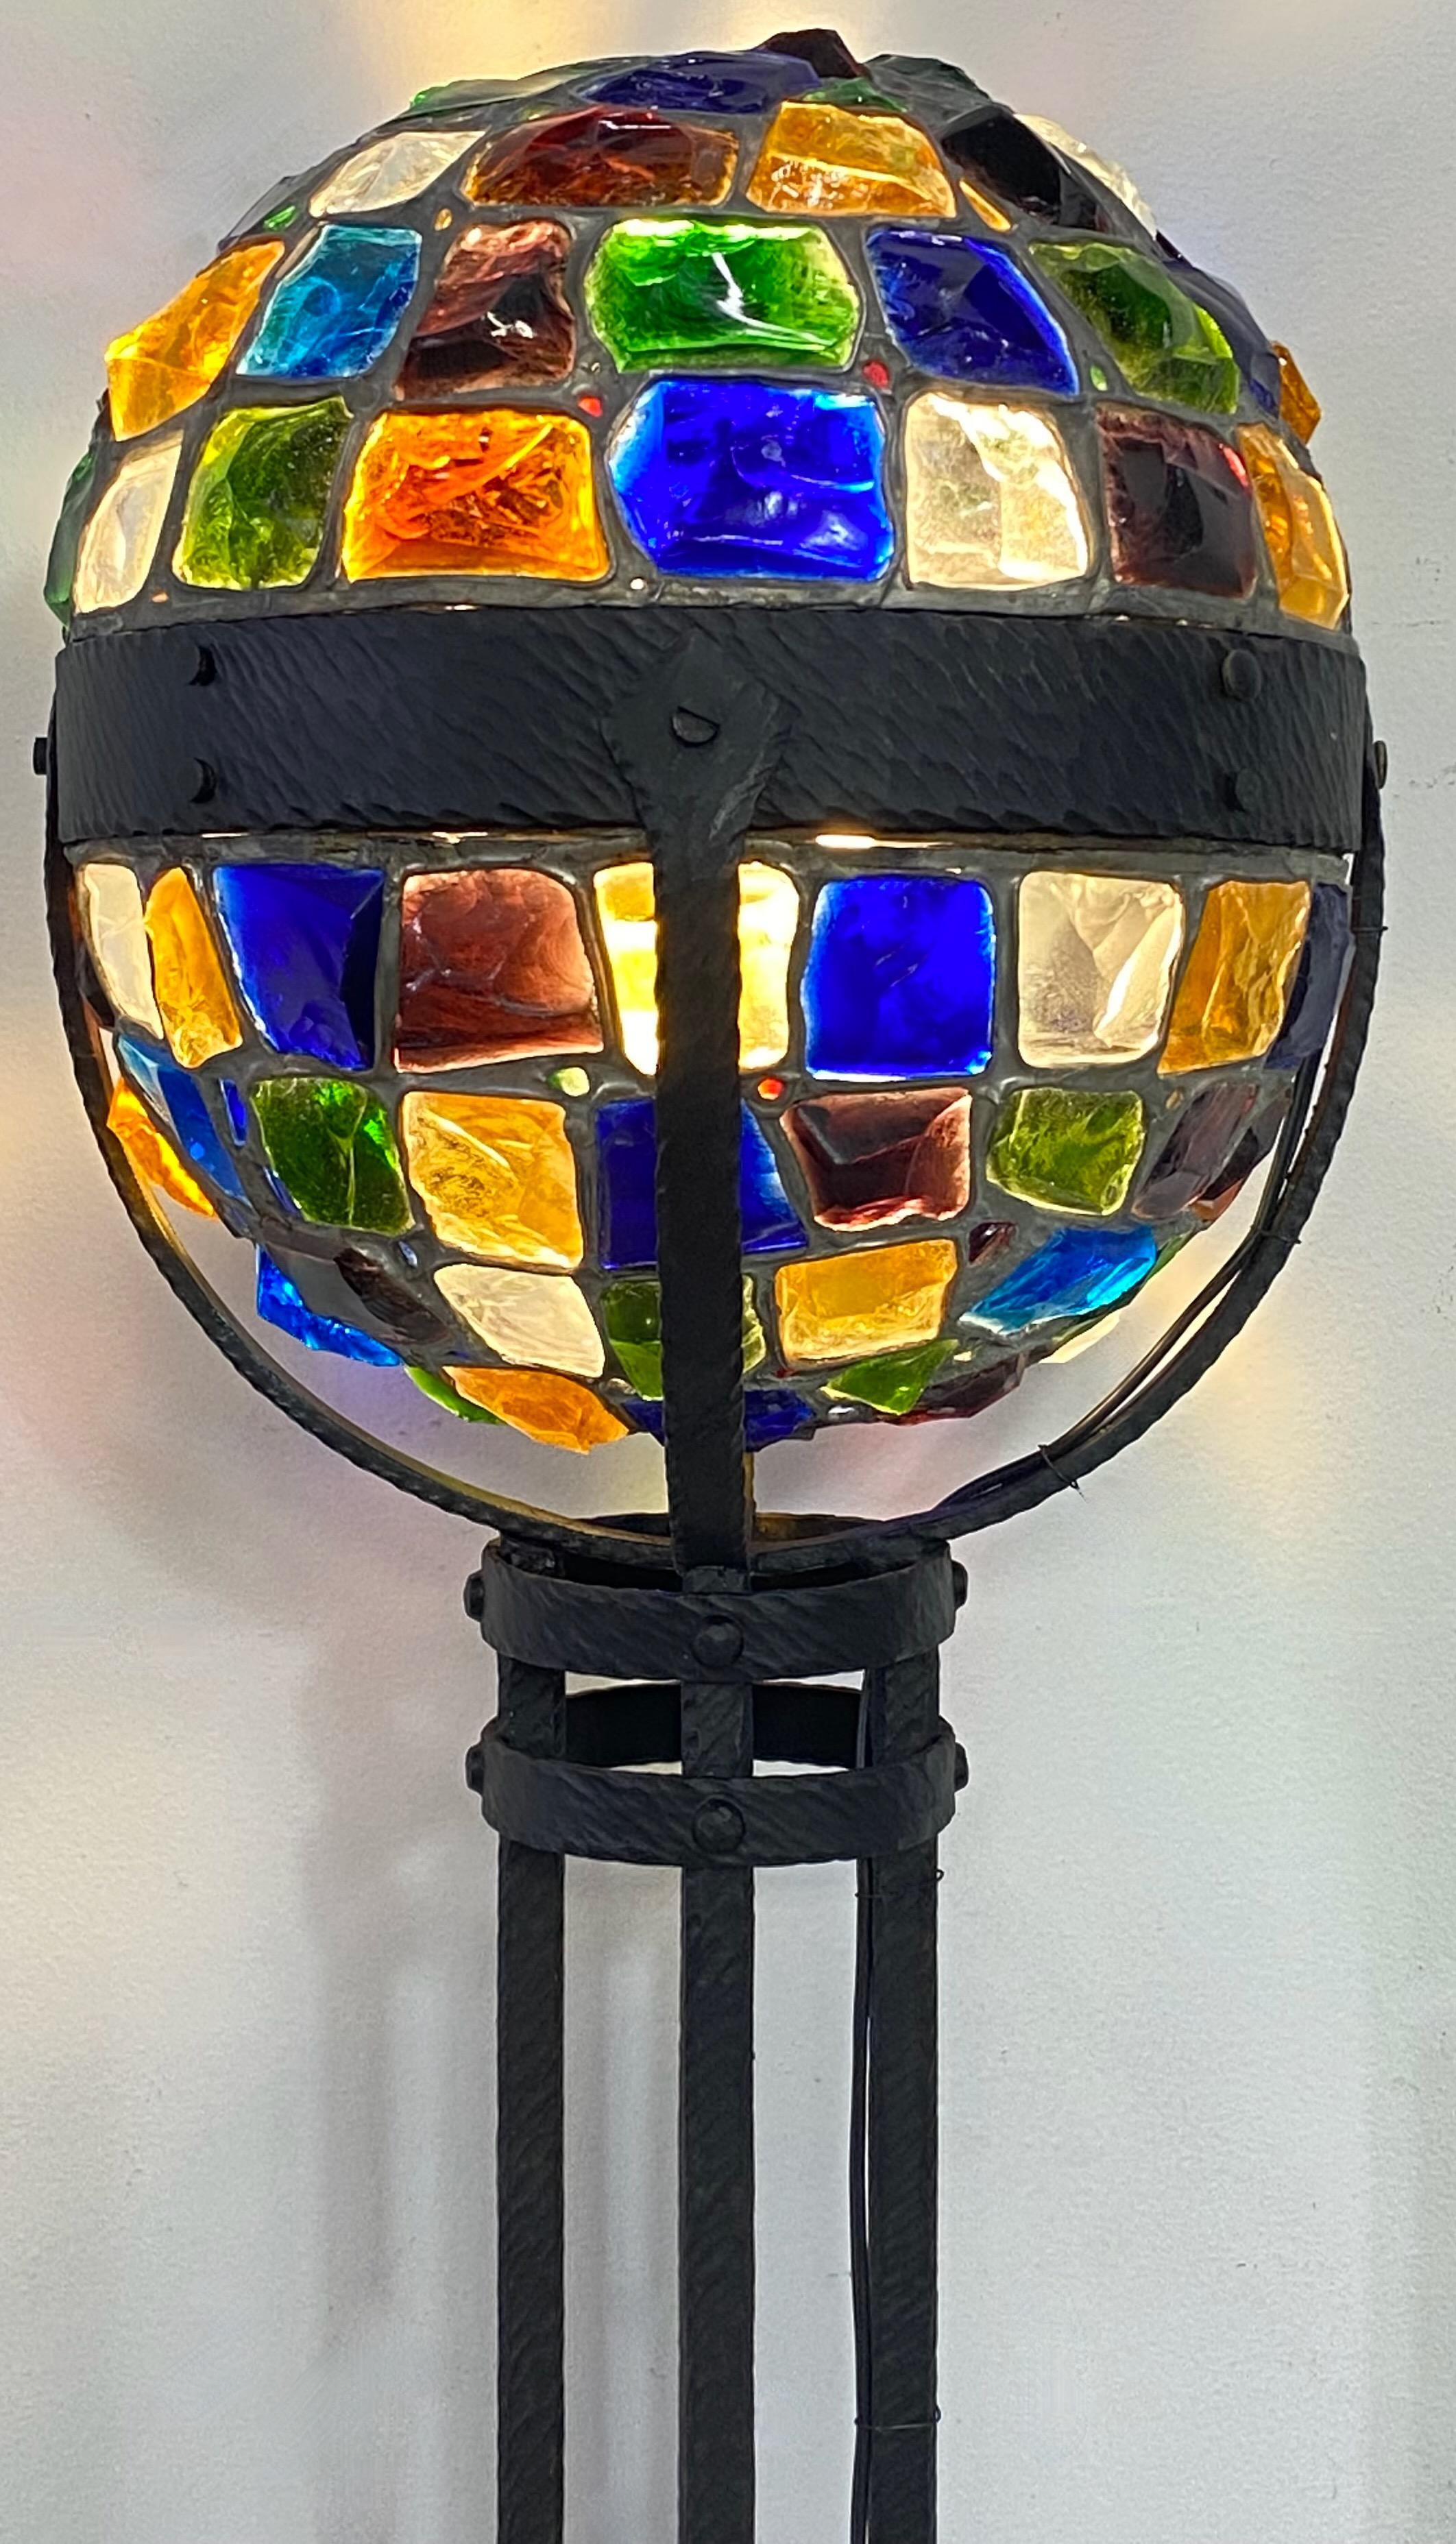 Arts and Crafts Secessionist Style Wrought Iron and Glass Chunk Jewel Newel Post Lamp, ca 1900